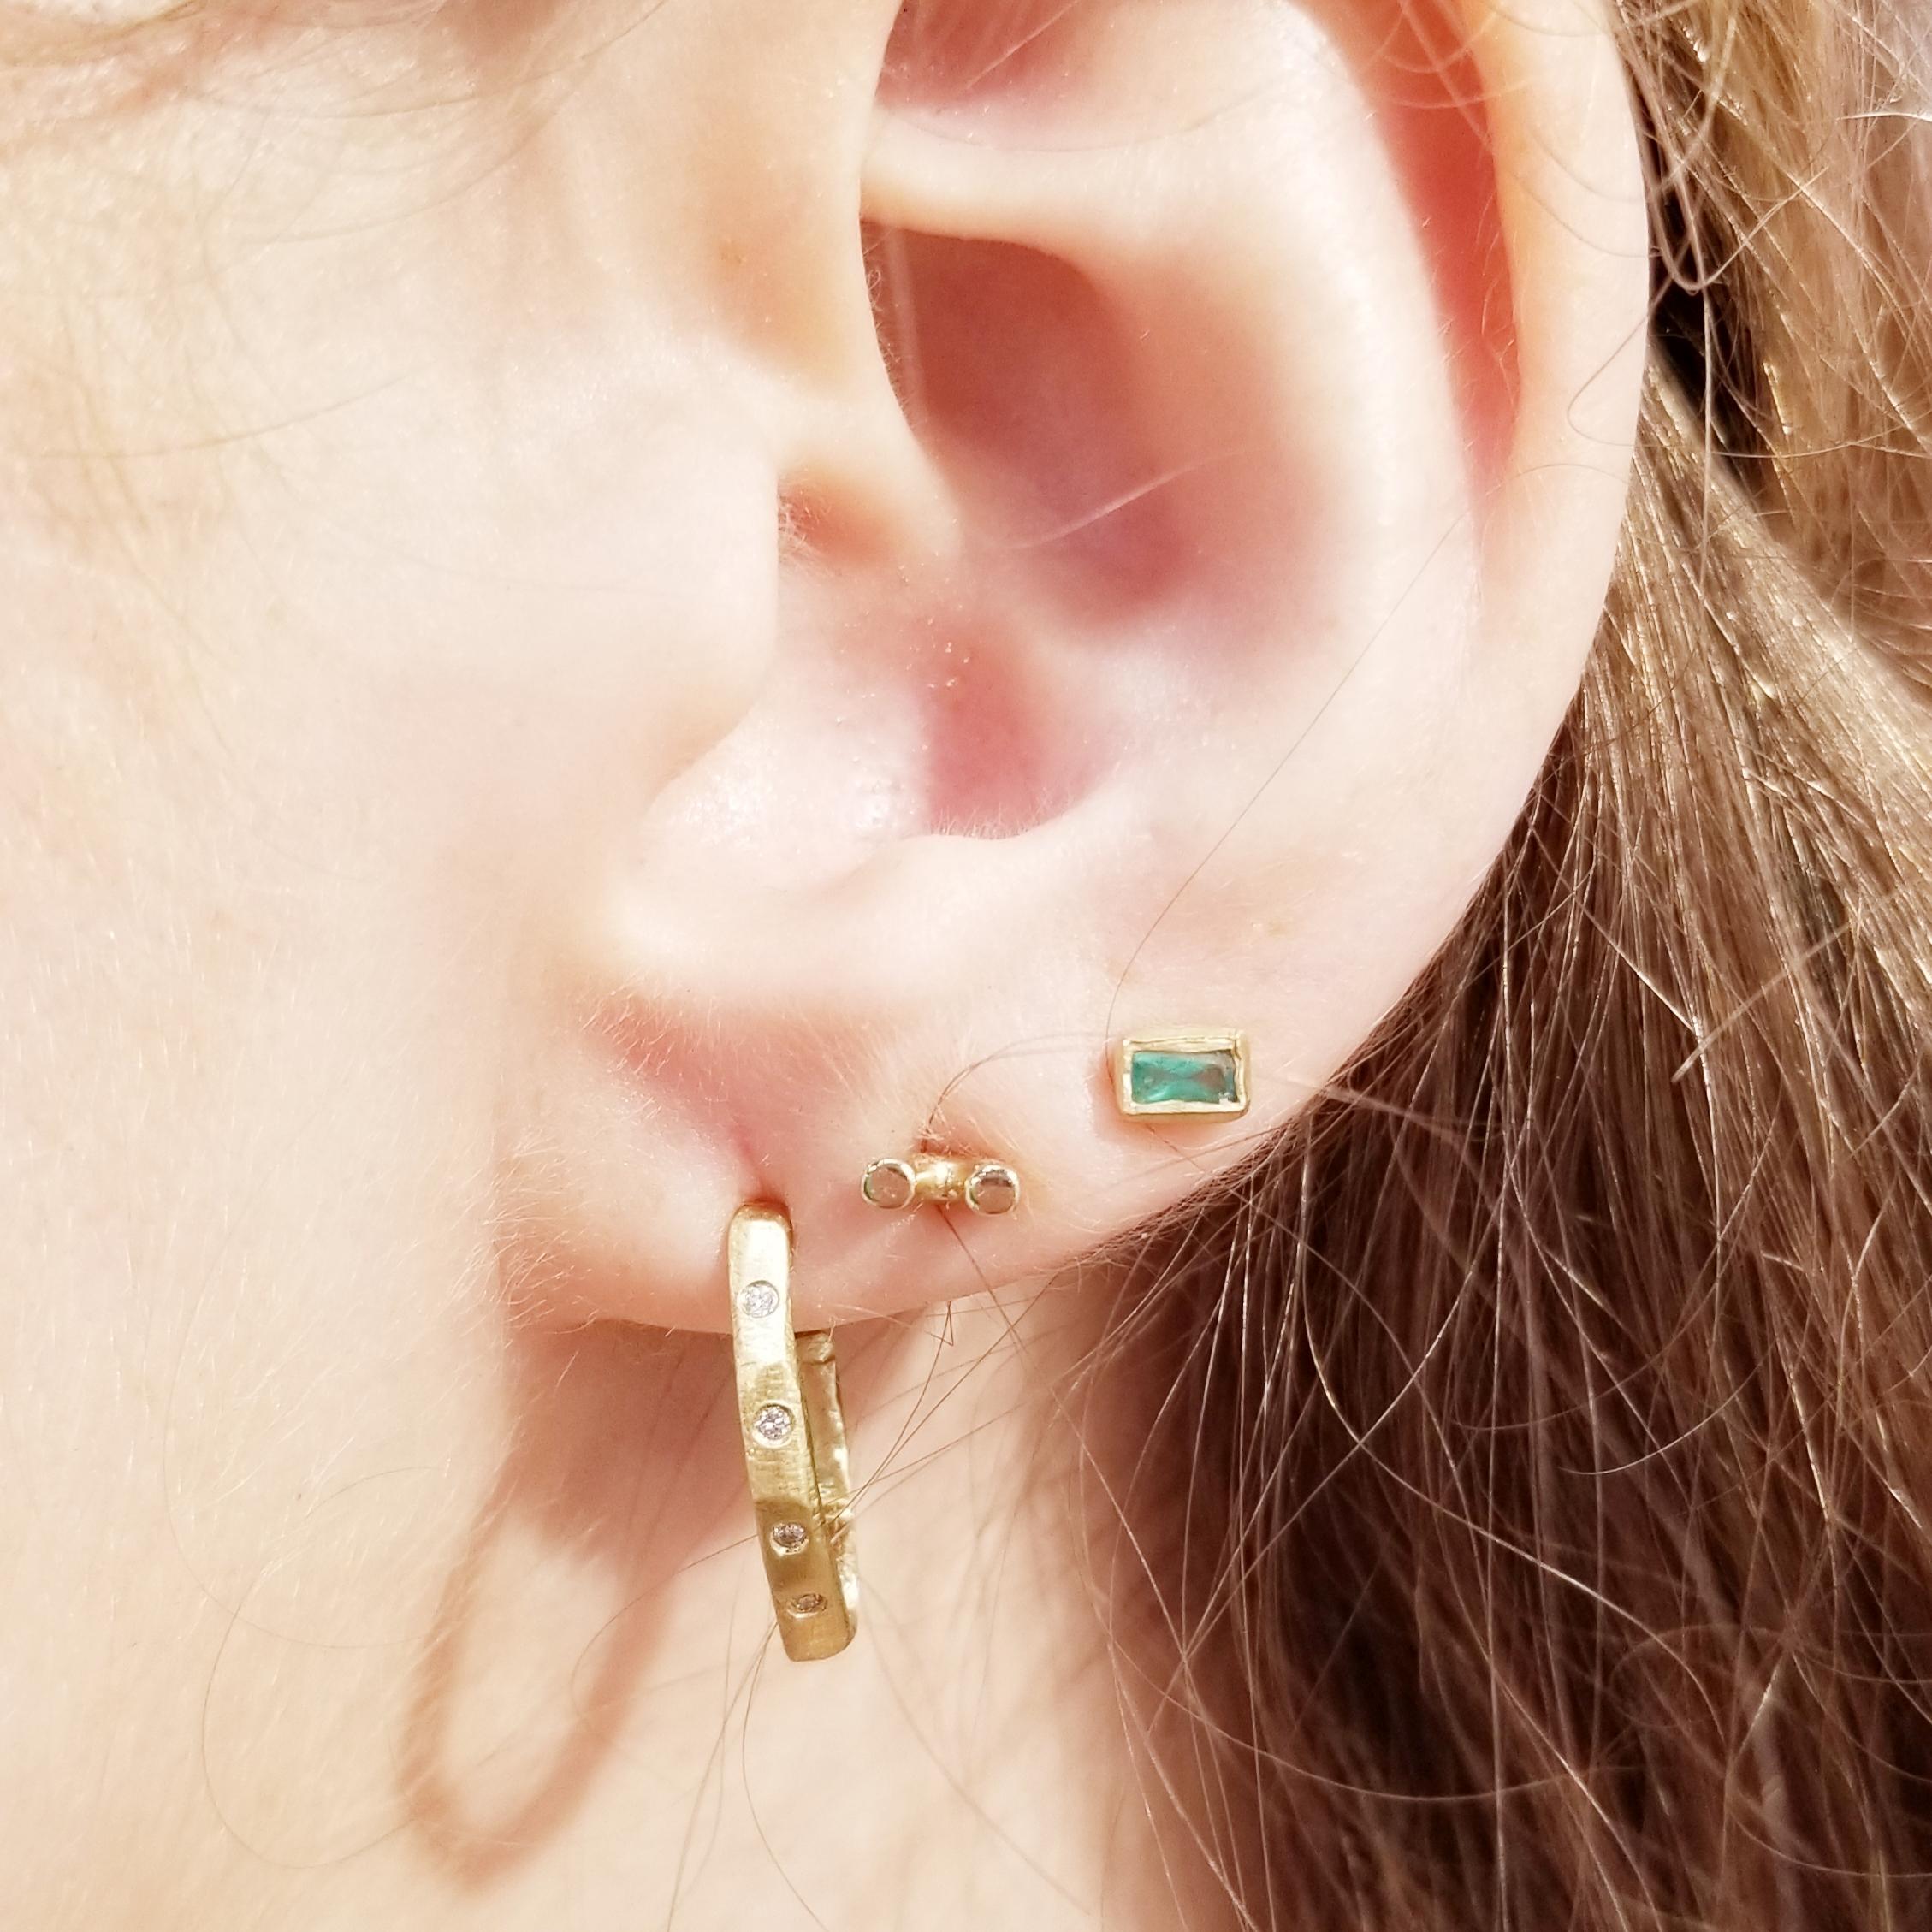 18KT gold diamond hoop earring handcarved by NYC jeweler Page Sargisson.  Perfect hoops that are both classic and modern at the same time.

Measures just under an inch.  Can be made without diamonds.  Contact seller if interested.